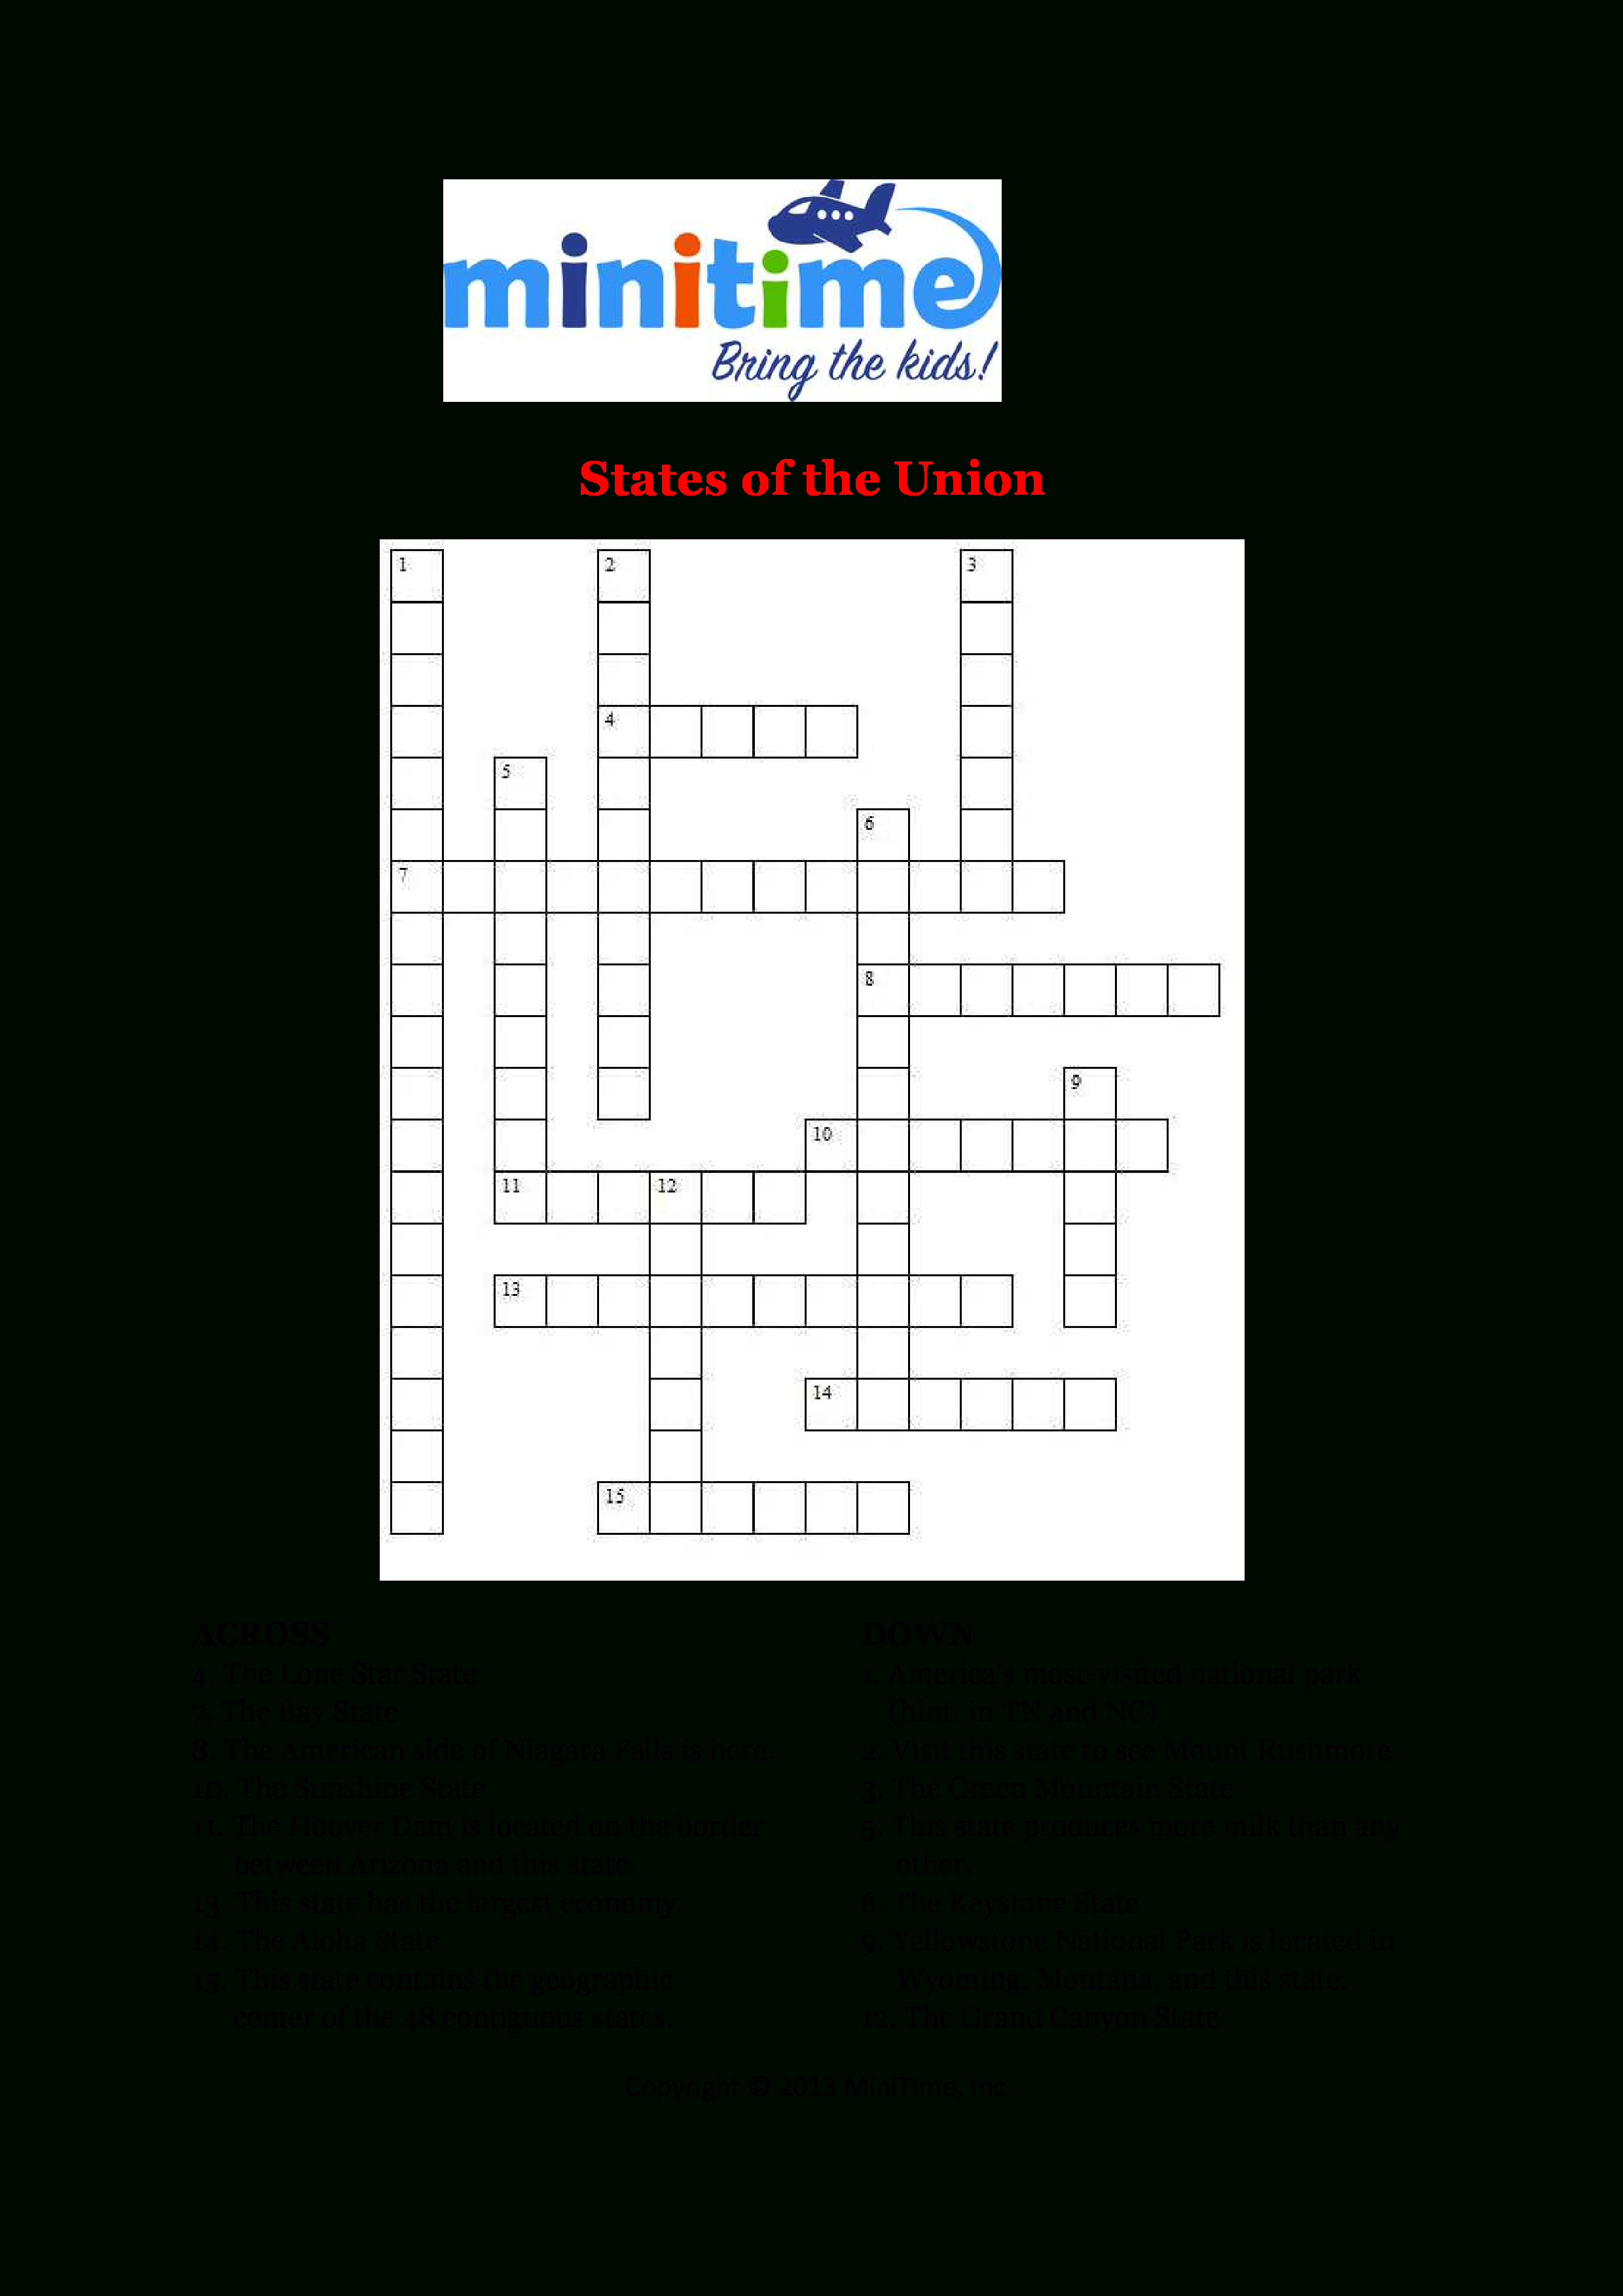 Us States Fun Facts Crossword Puzzles | Free Printable Travel - 50 States Crossword Puzzle Printable